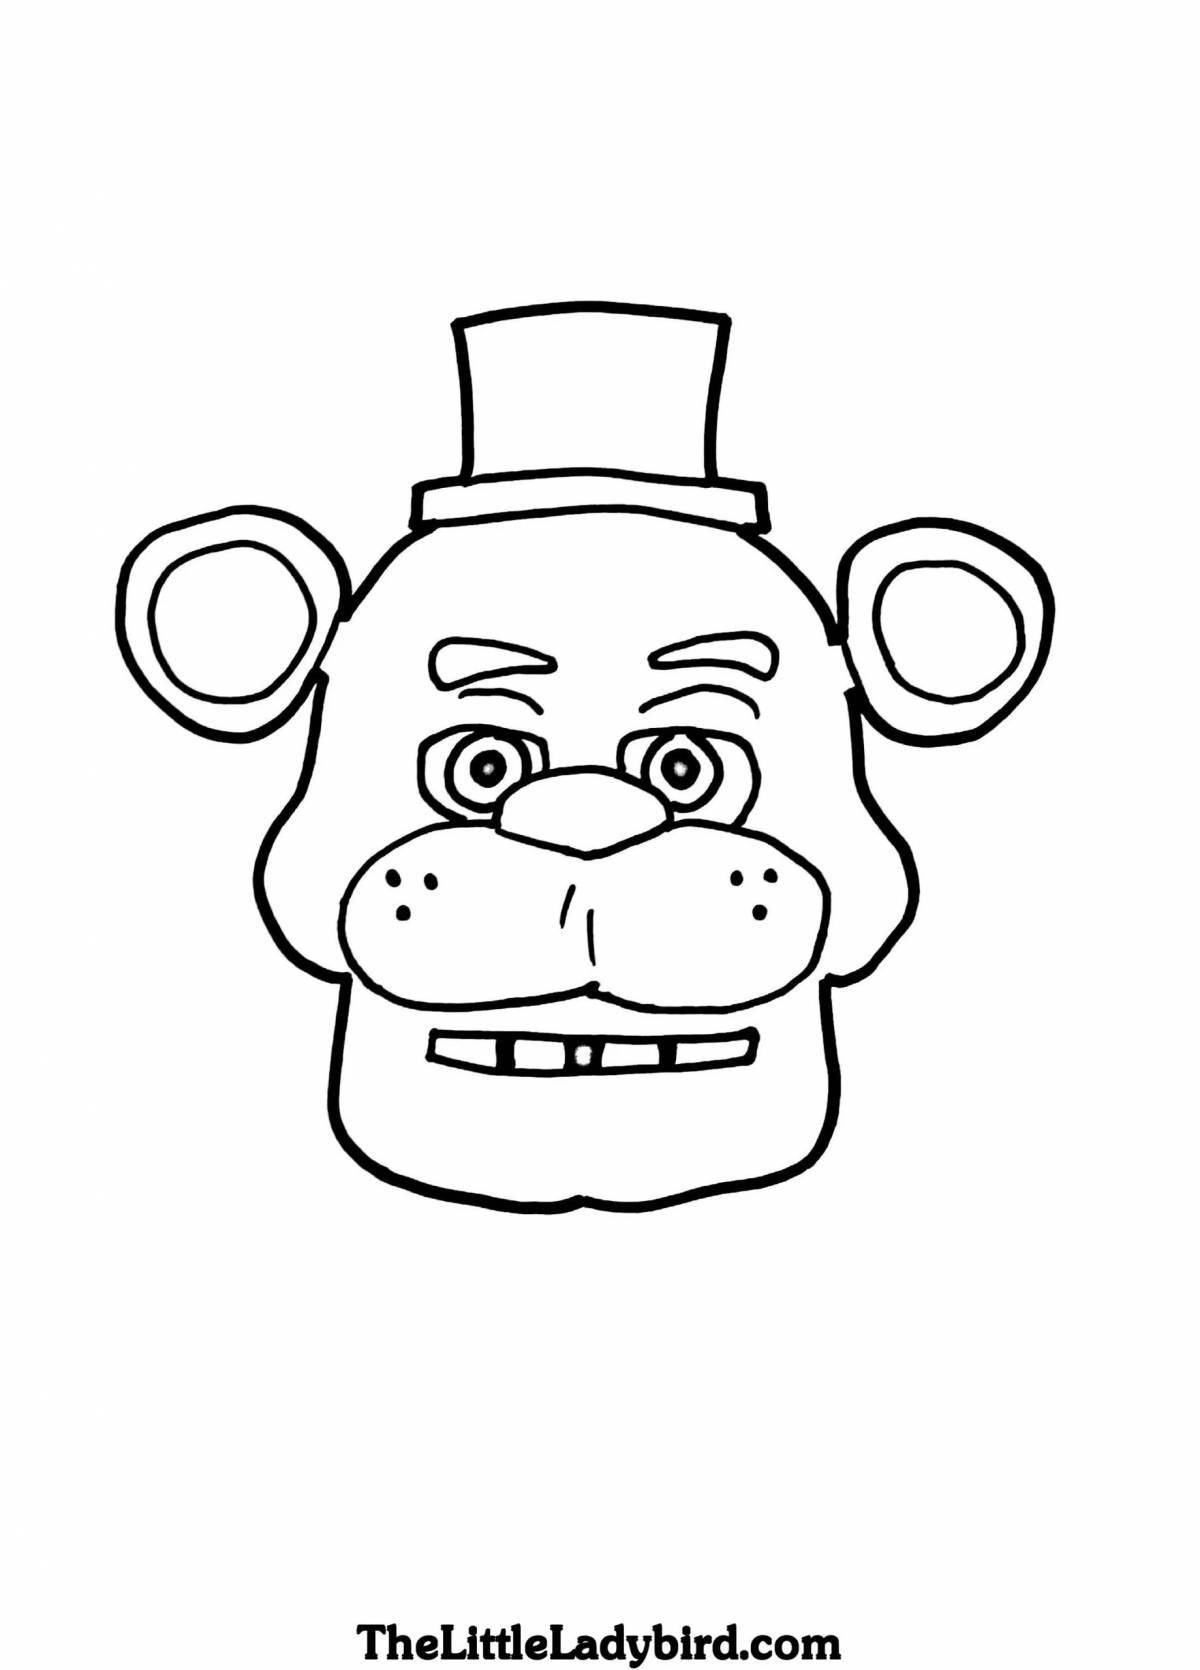 Charming bonnie mask coloring page